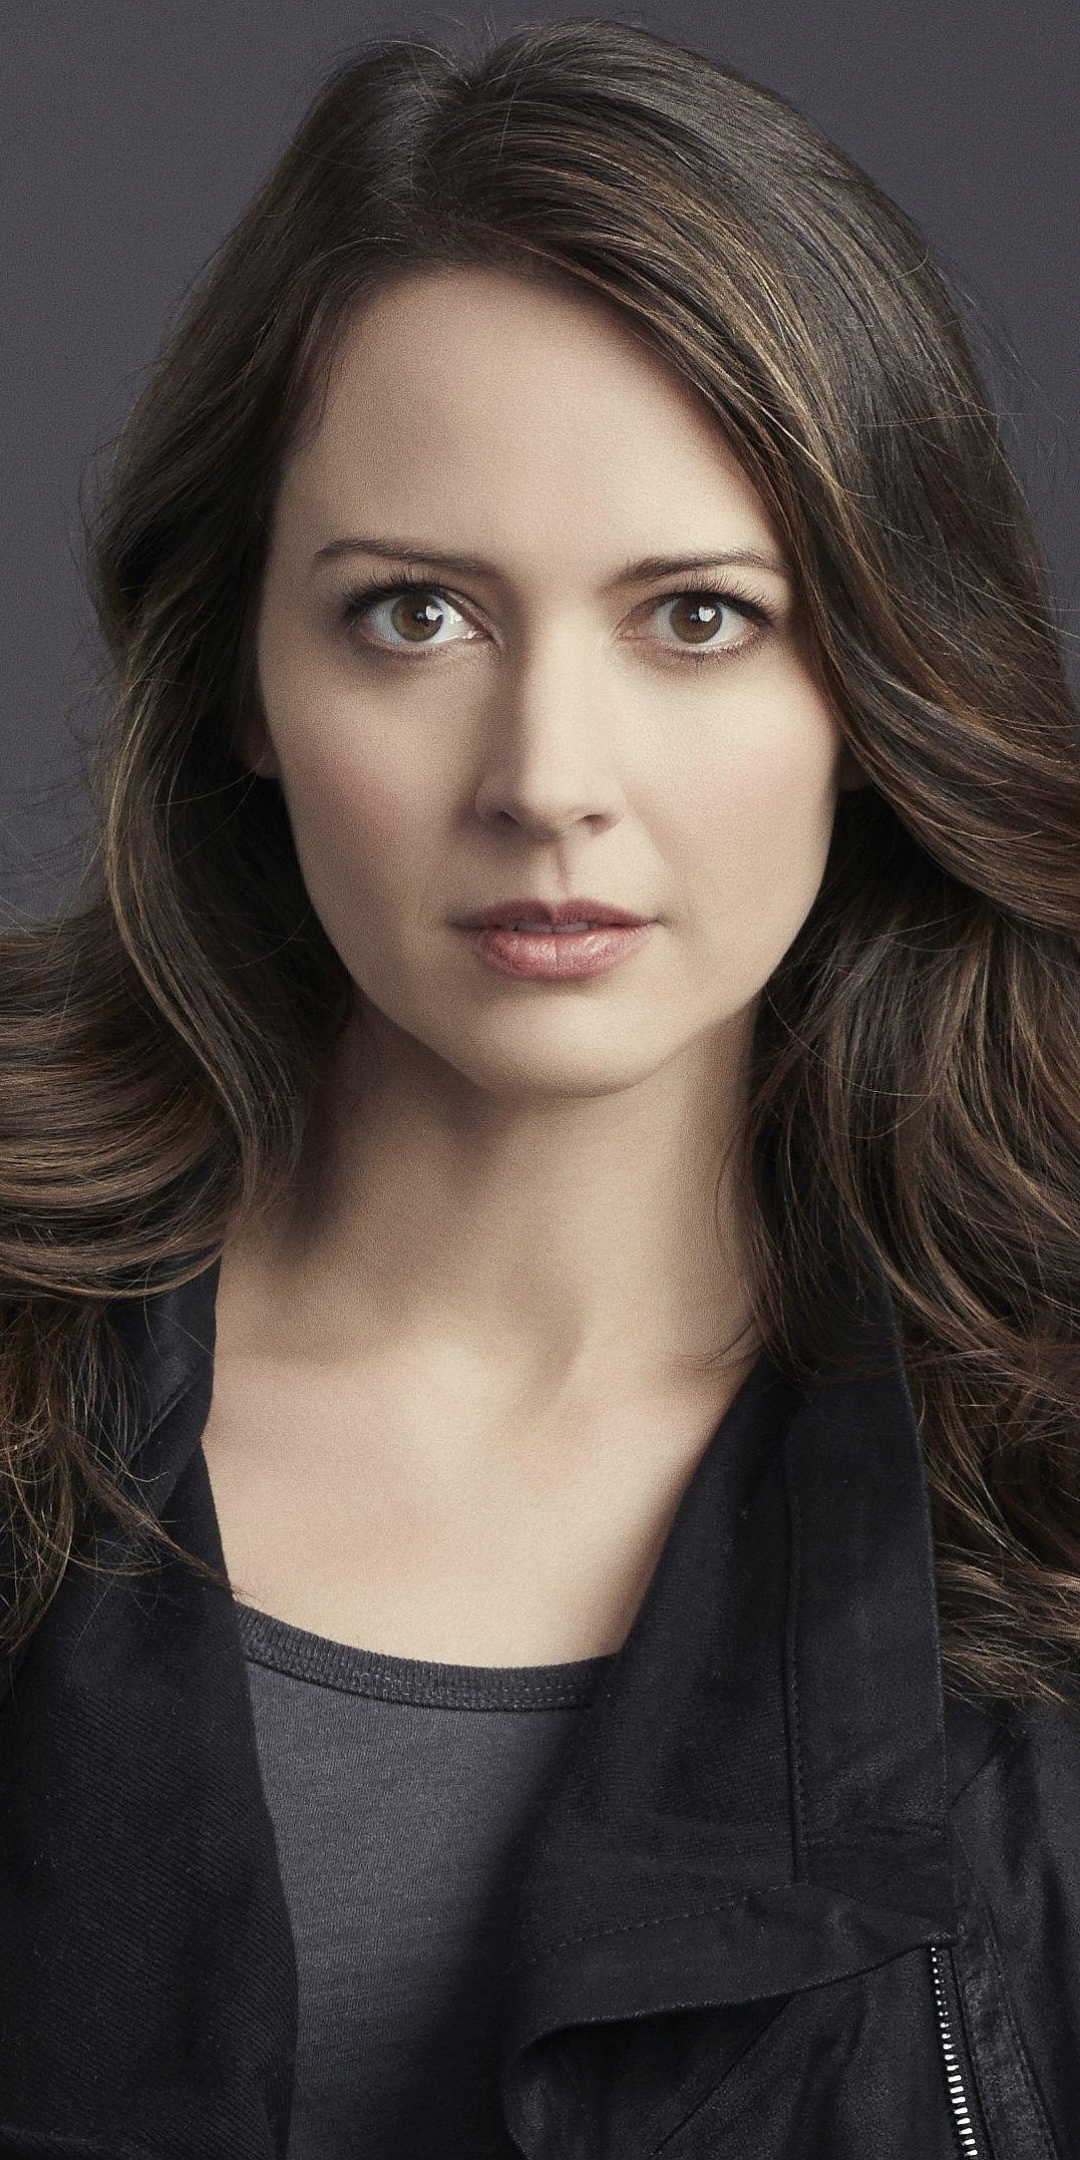 tv show, person of interest, amy acker